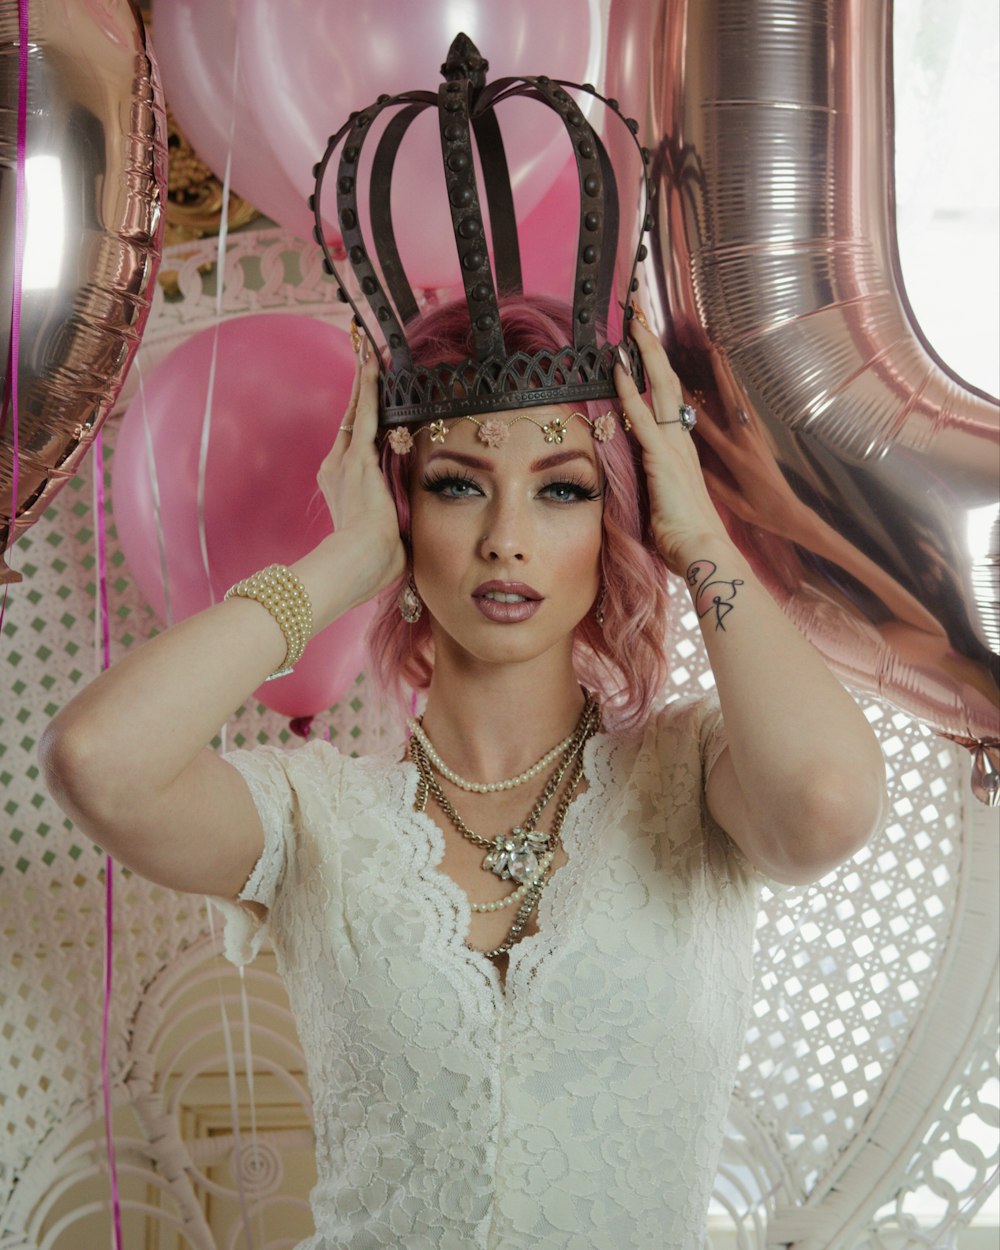 a woman with pink hair wearing a crown